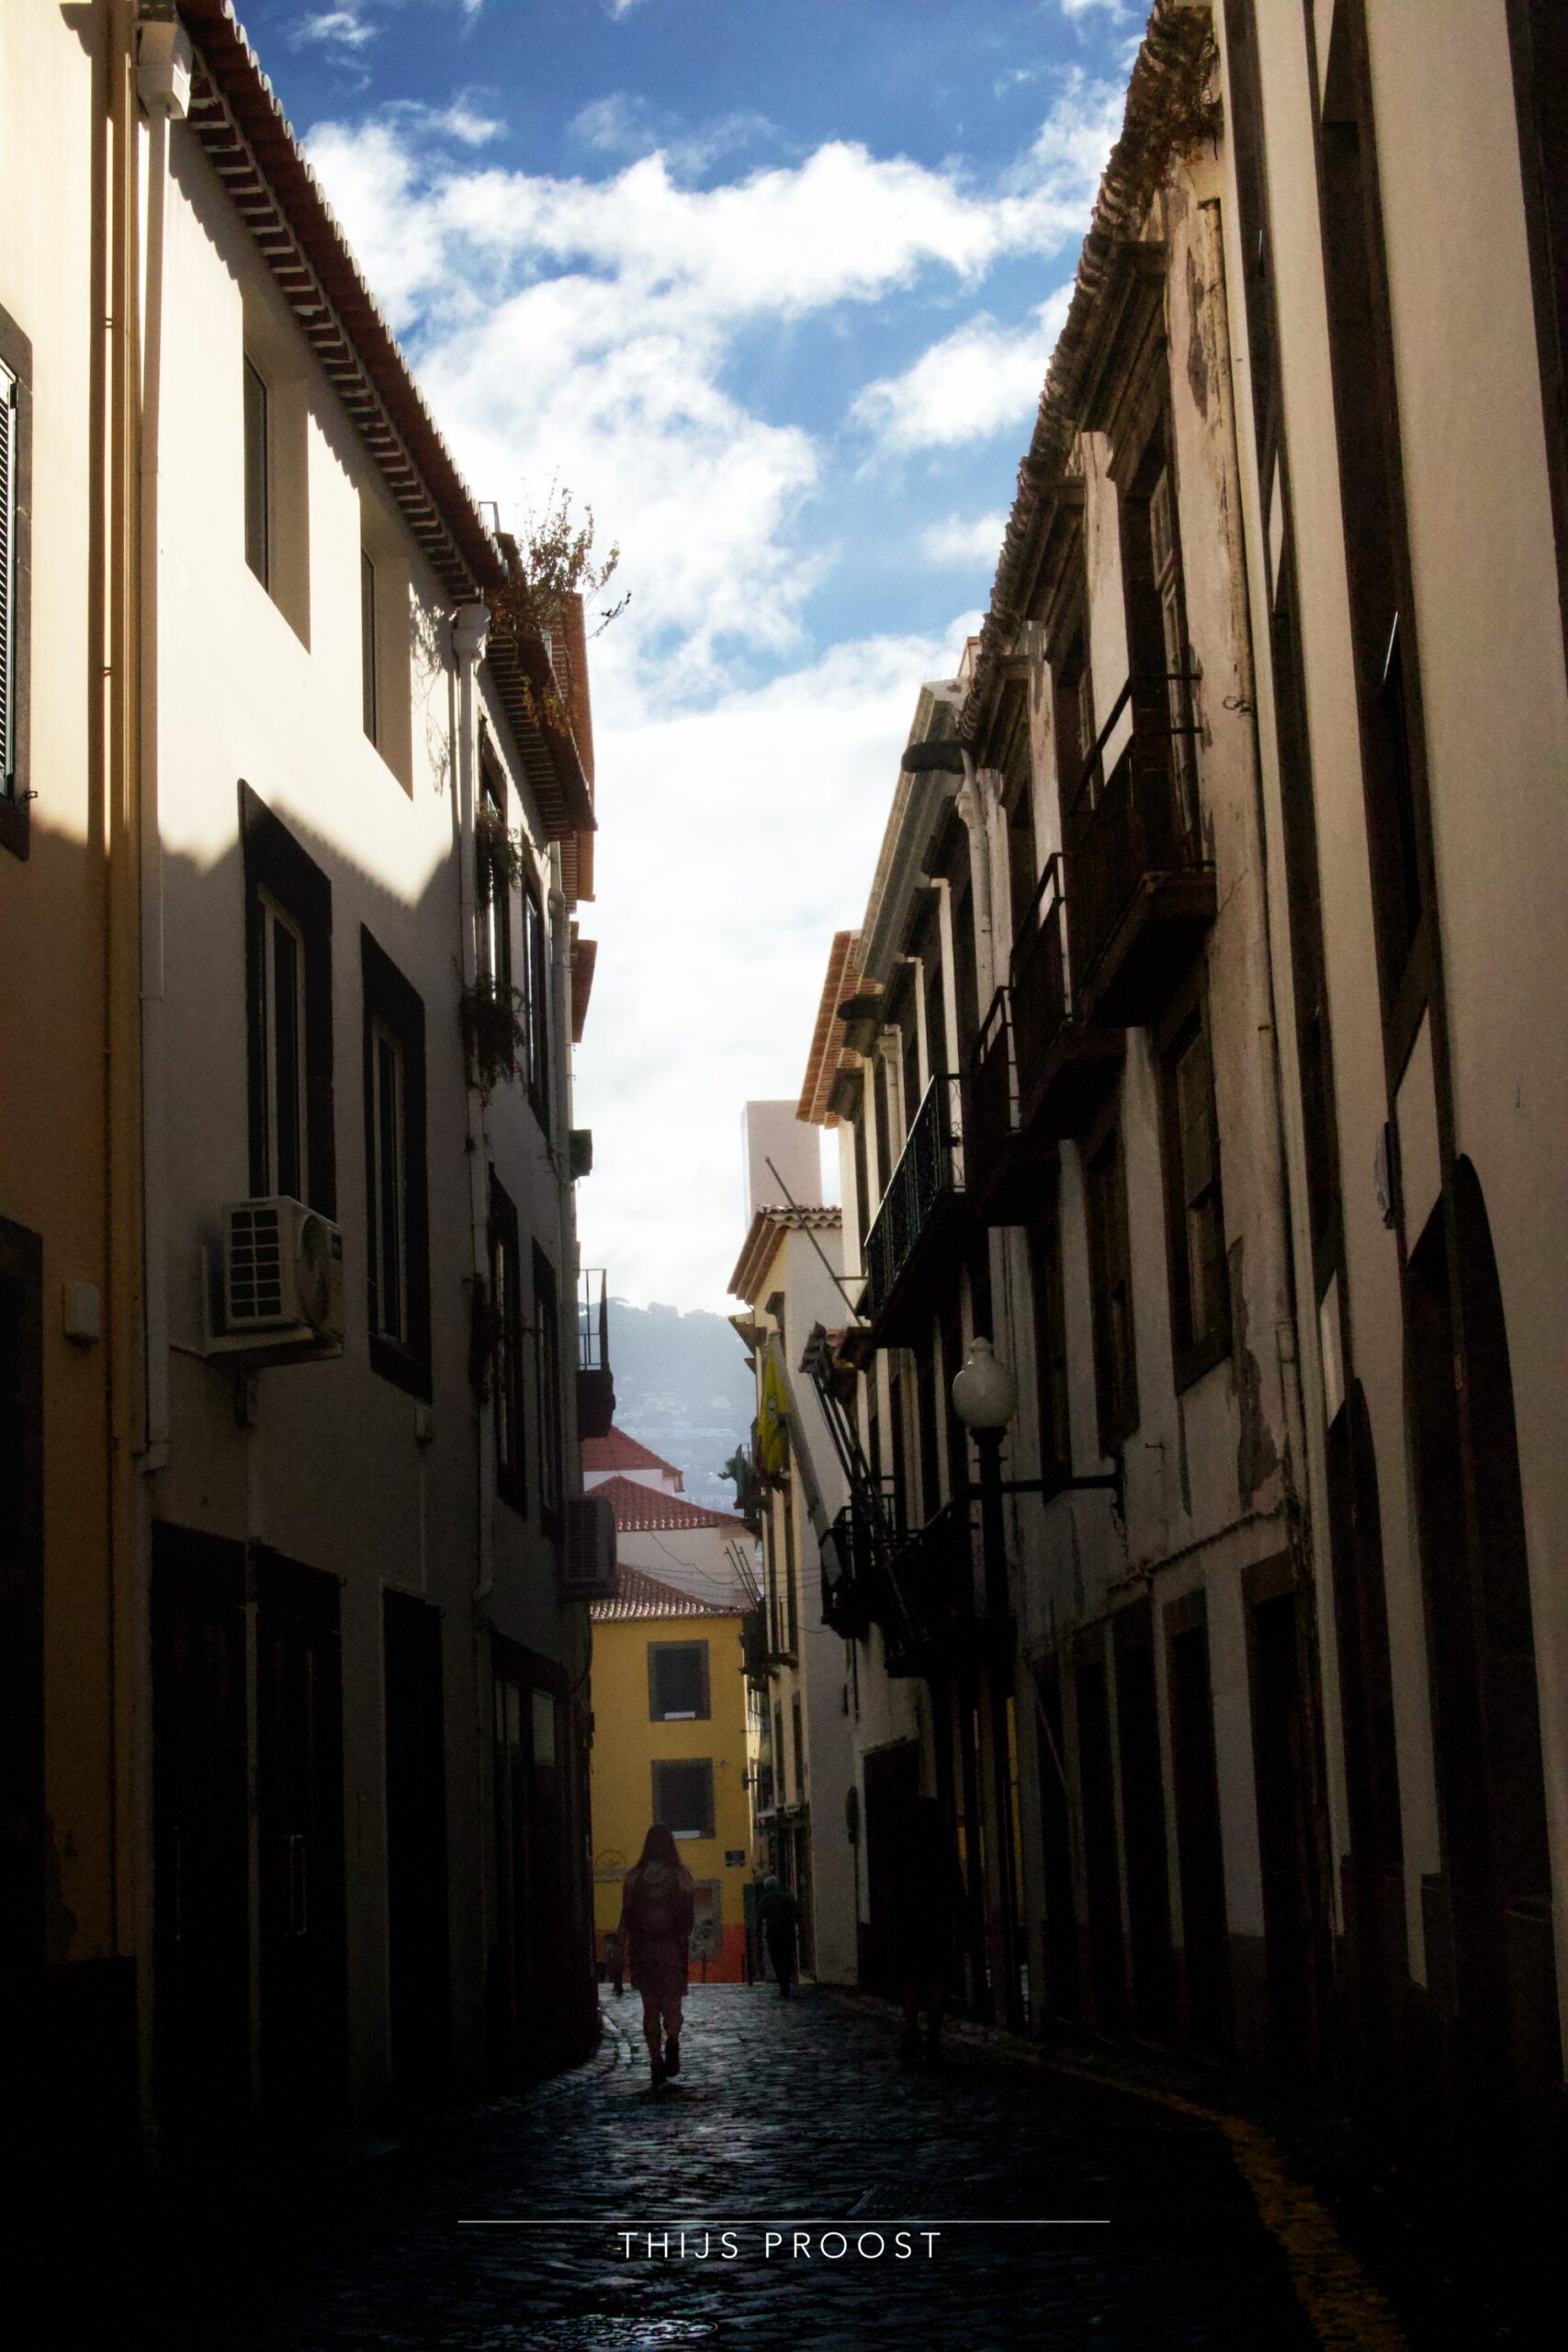 A view of a street in shadow in the Center of Funchal Madeira. A person walks in the dark. Sun hits the tips of the buildings. Clouds in the sky.